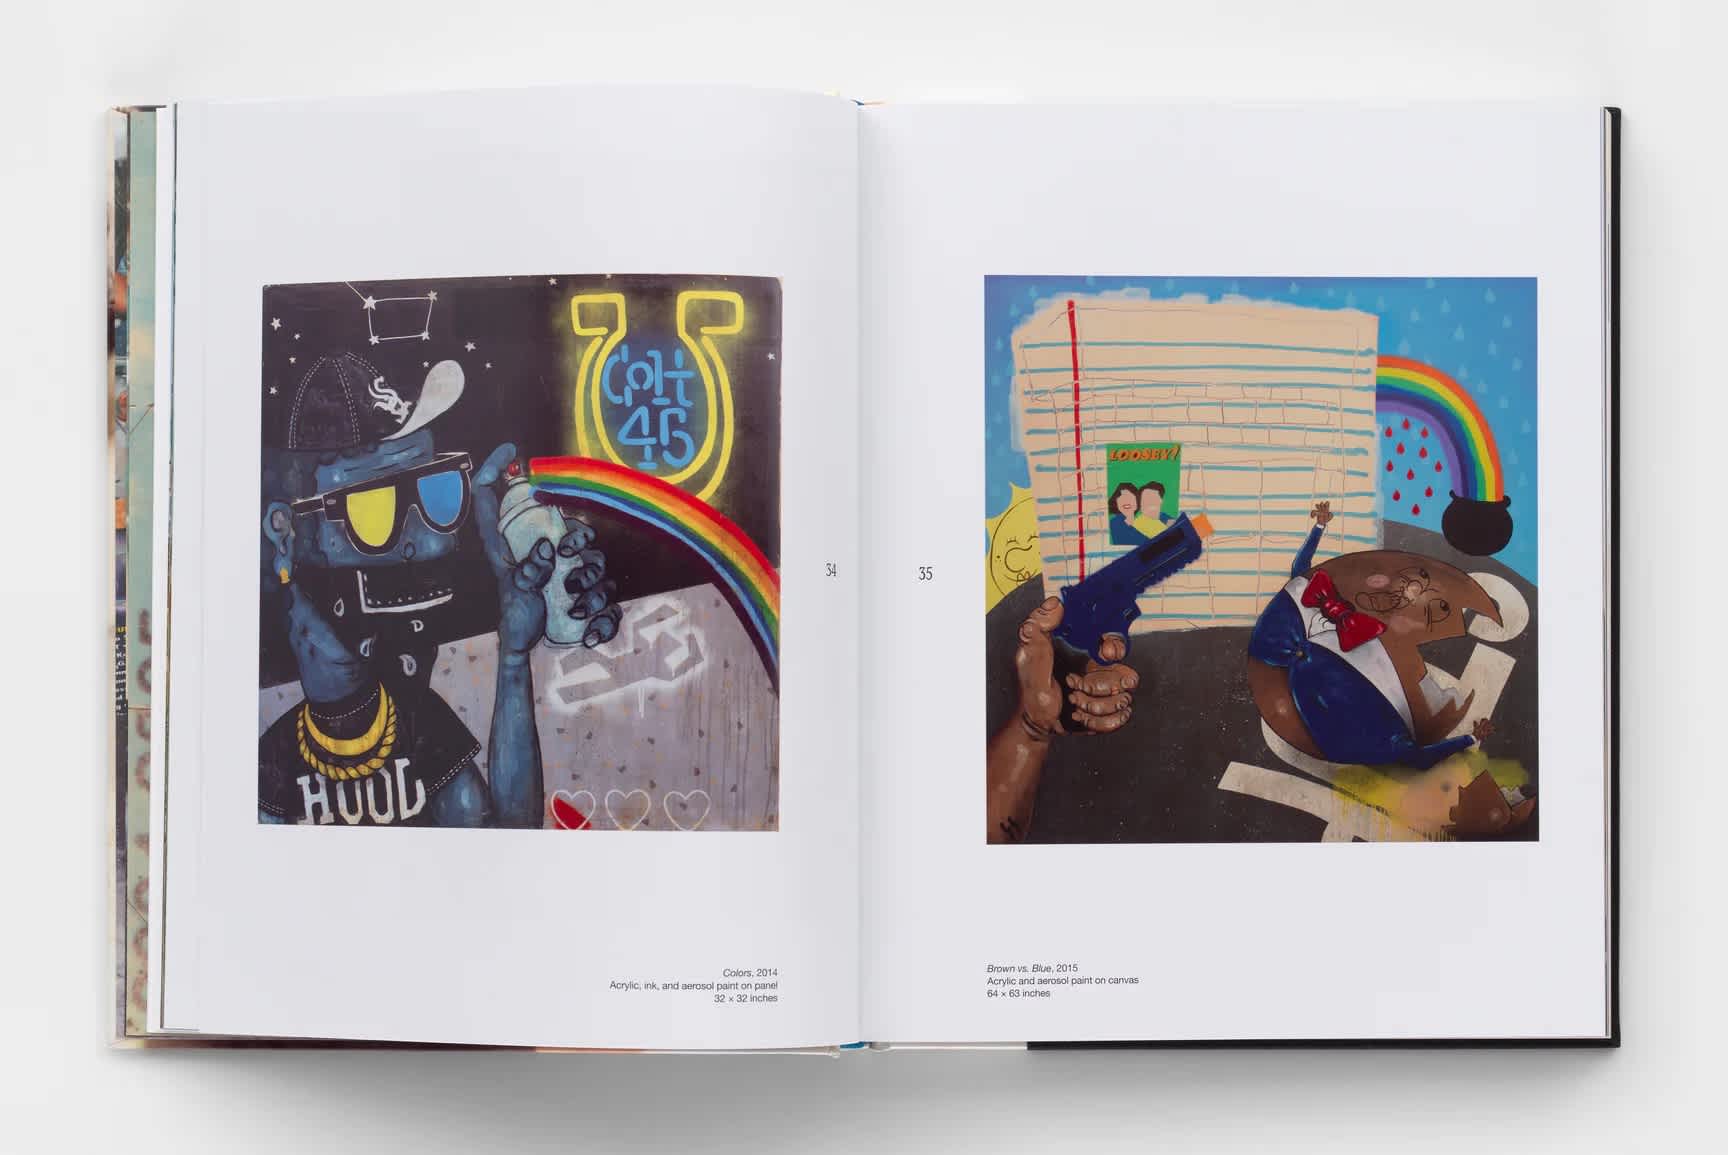 Book interior with a painting by the artist, Pat Phillips, on either page. The paintings are a mix of acrylic, ink, aerosol paint on a panel and canvas. Both works are vivid colors and include renderings of a rainbow. Various characters make up the scenes.